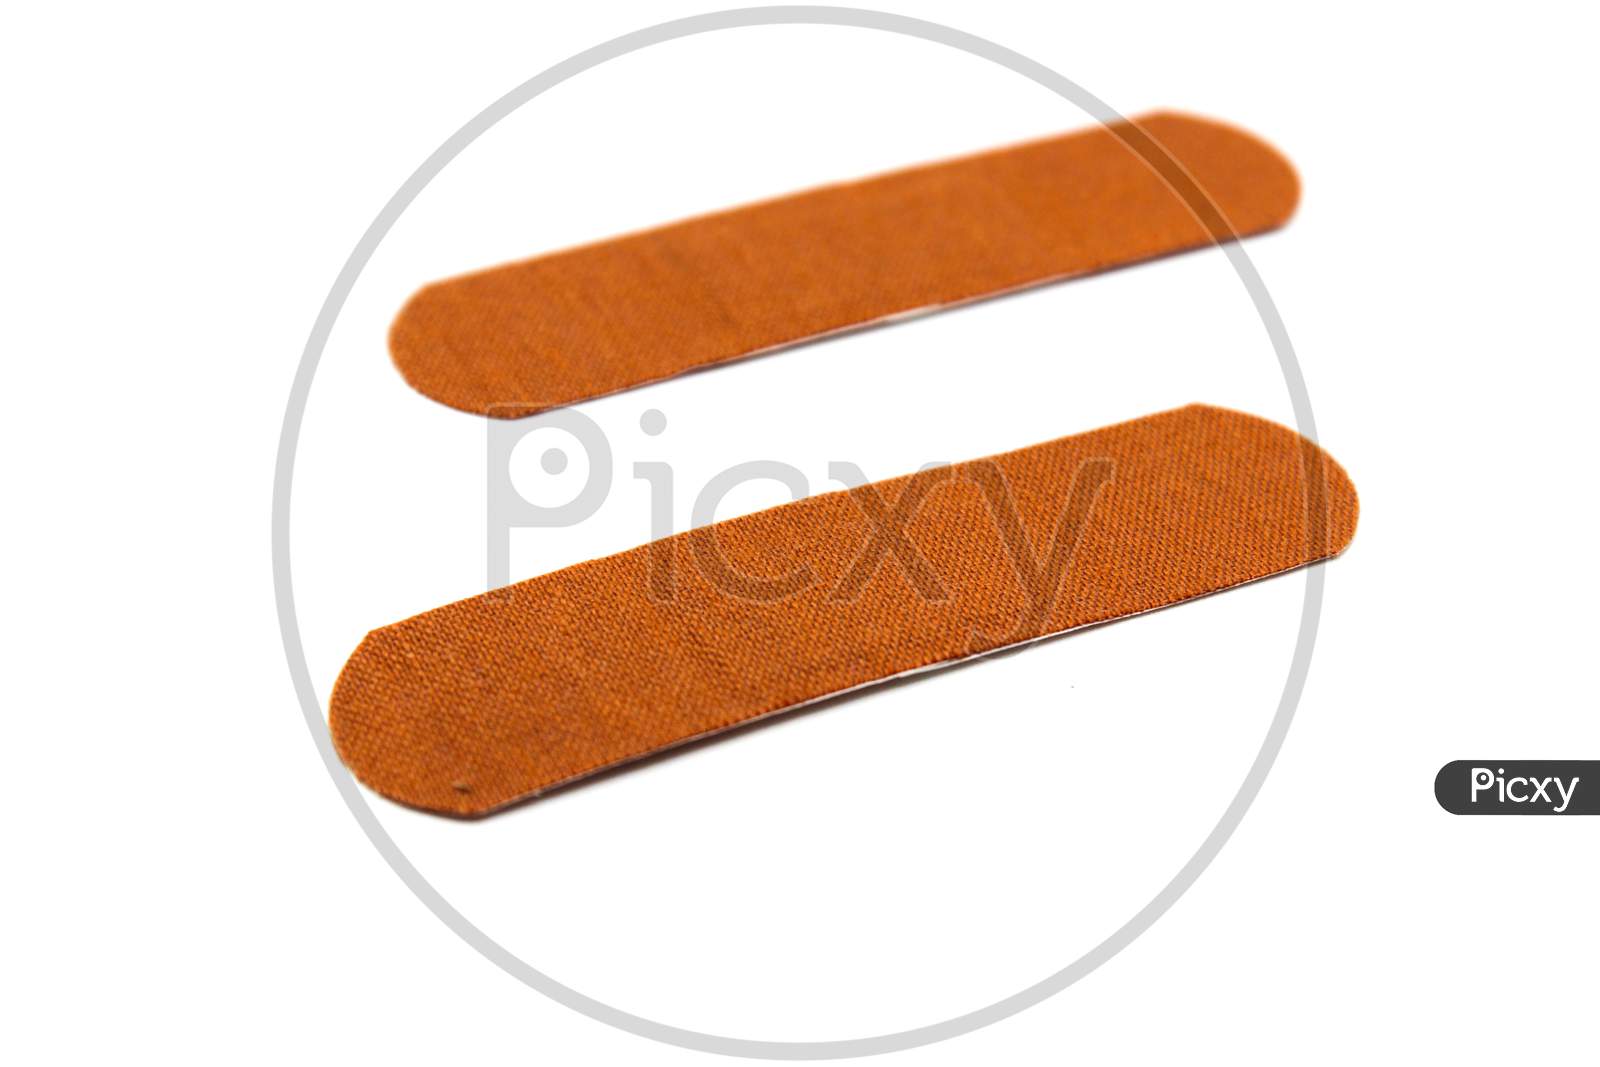 A Picture Of Bandage On White Background